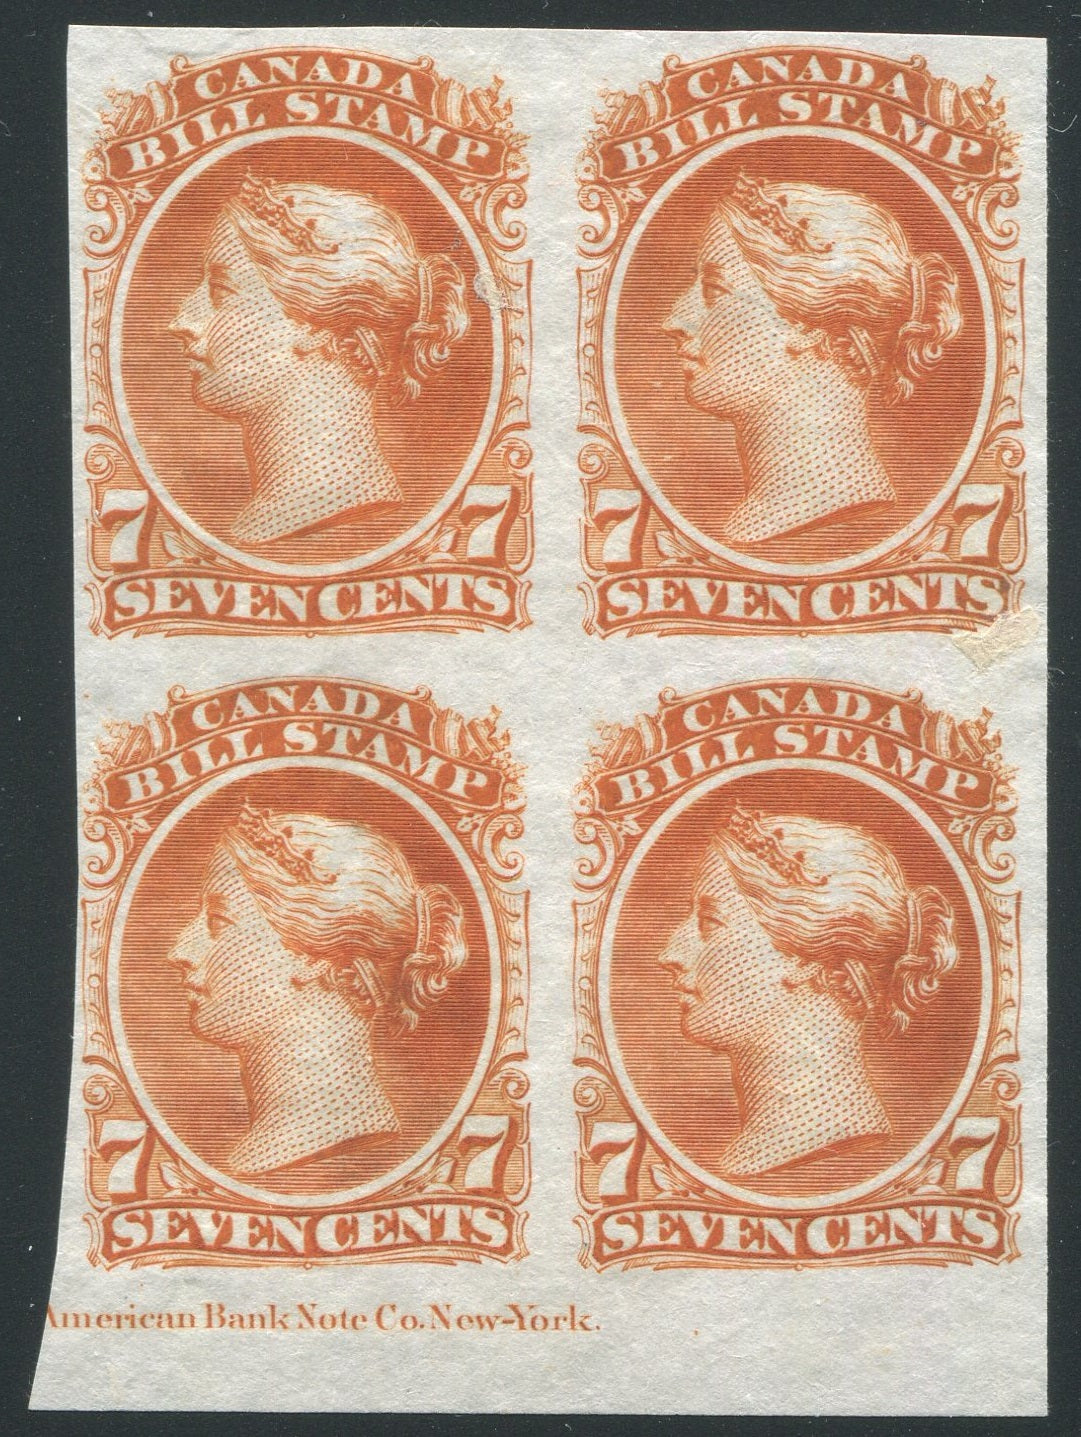 0024FB1910 - FB24 - Trial Colour Plate Proof Block of 4